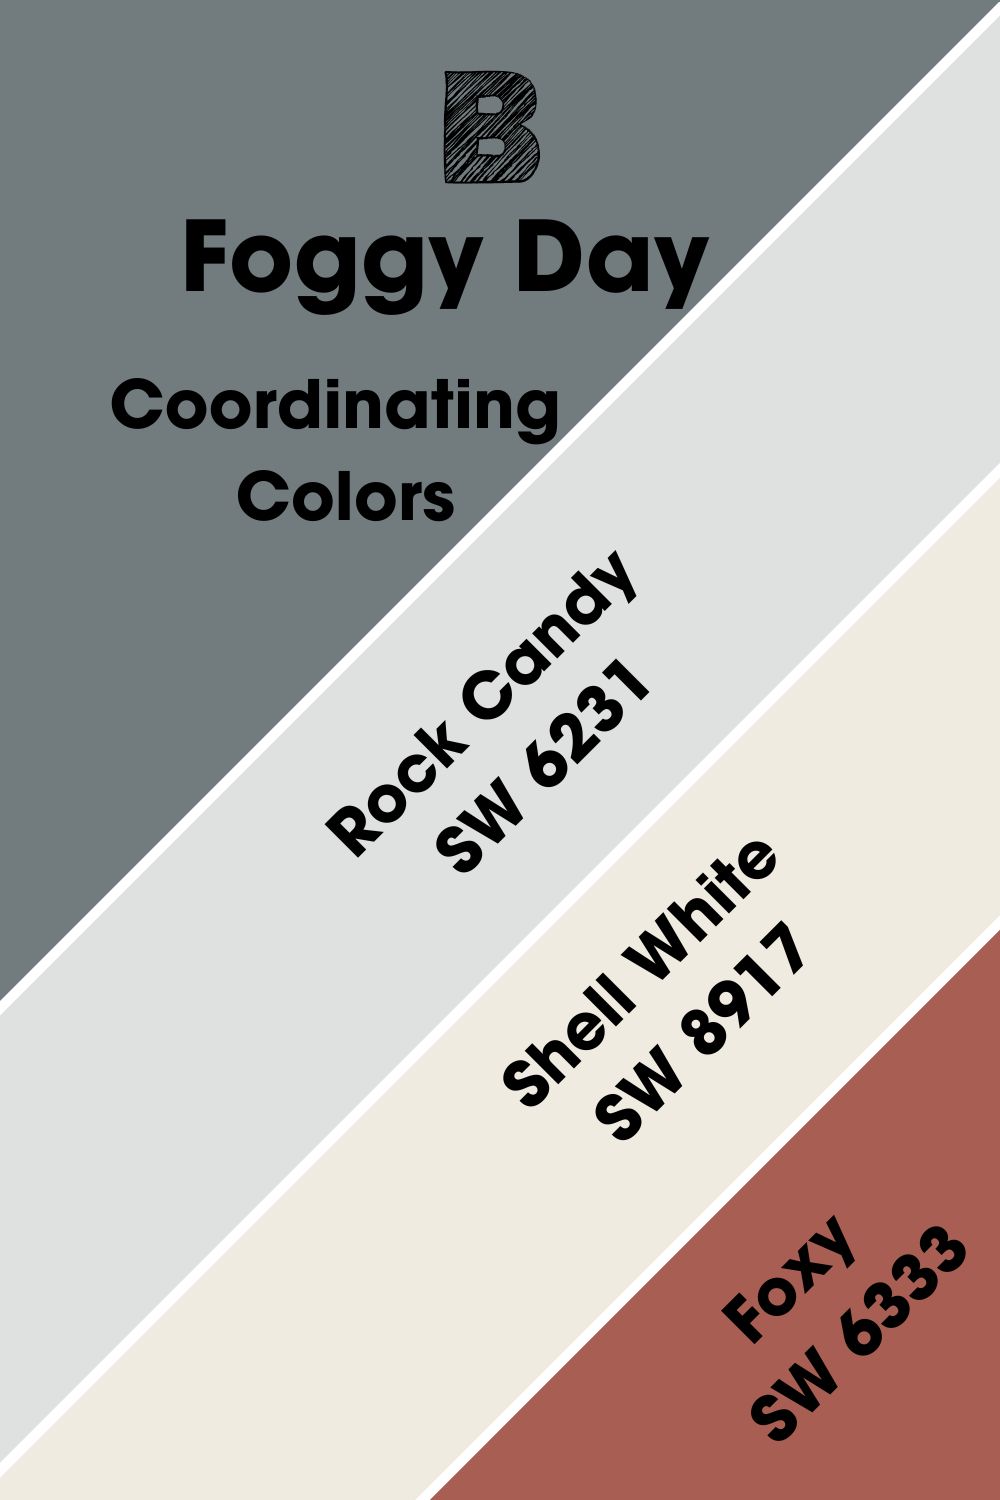 Foggy Day SW 6235 Coordinating Colors